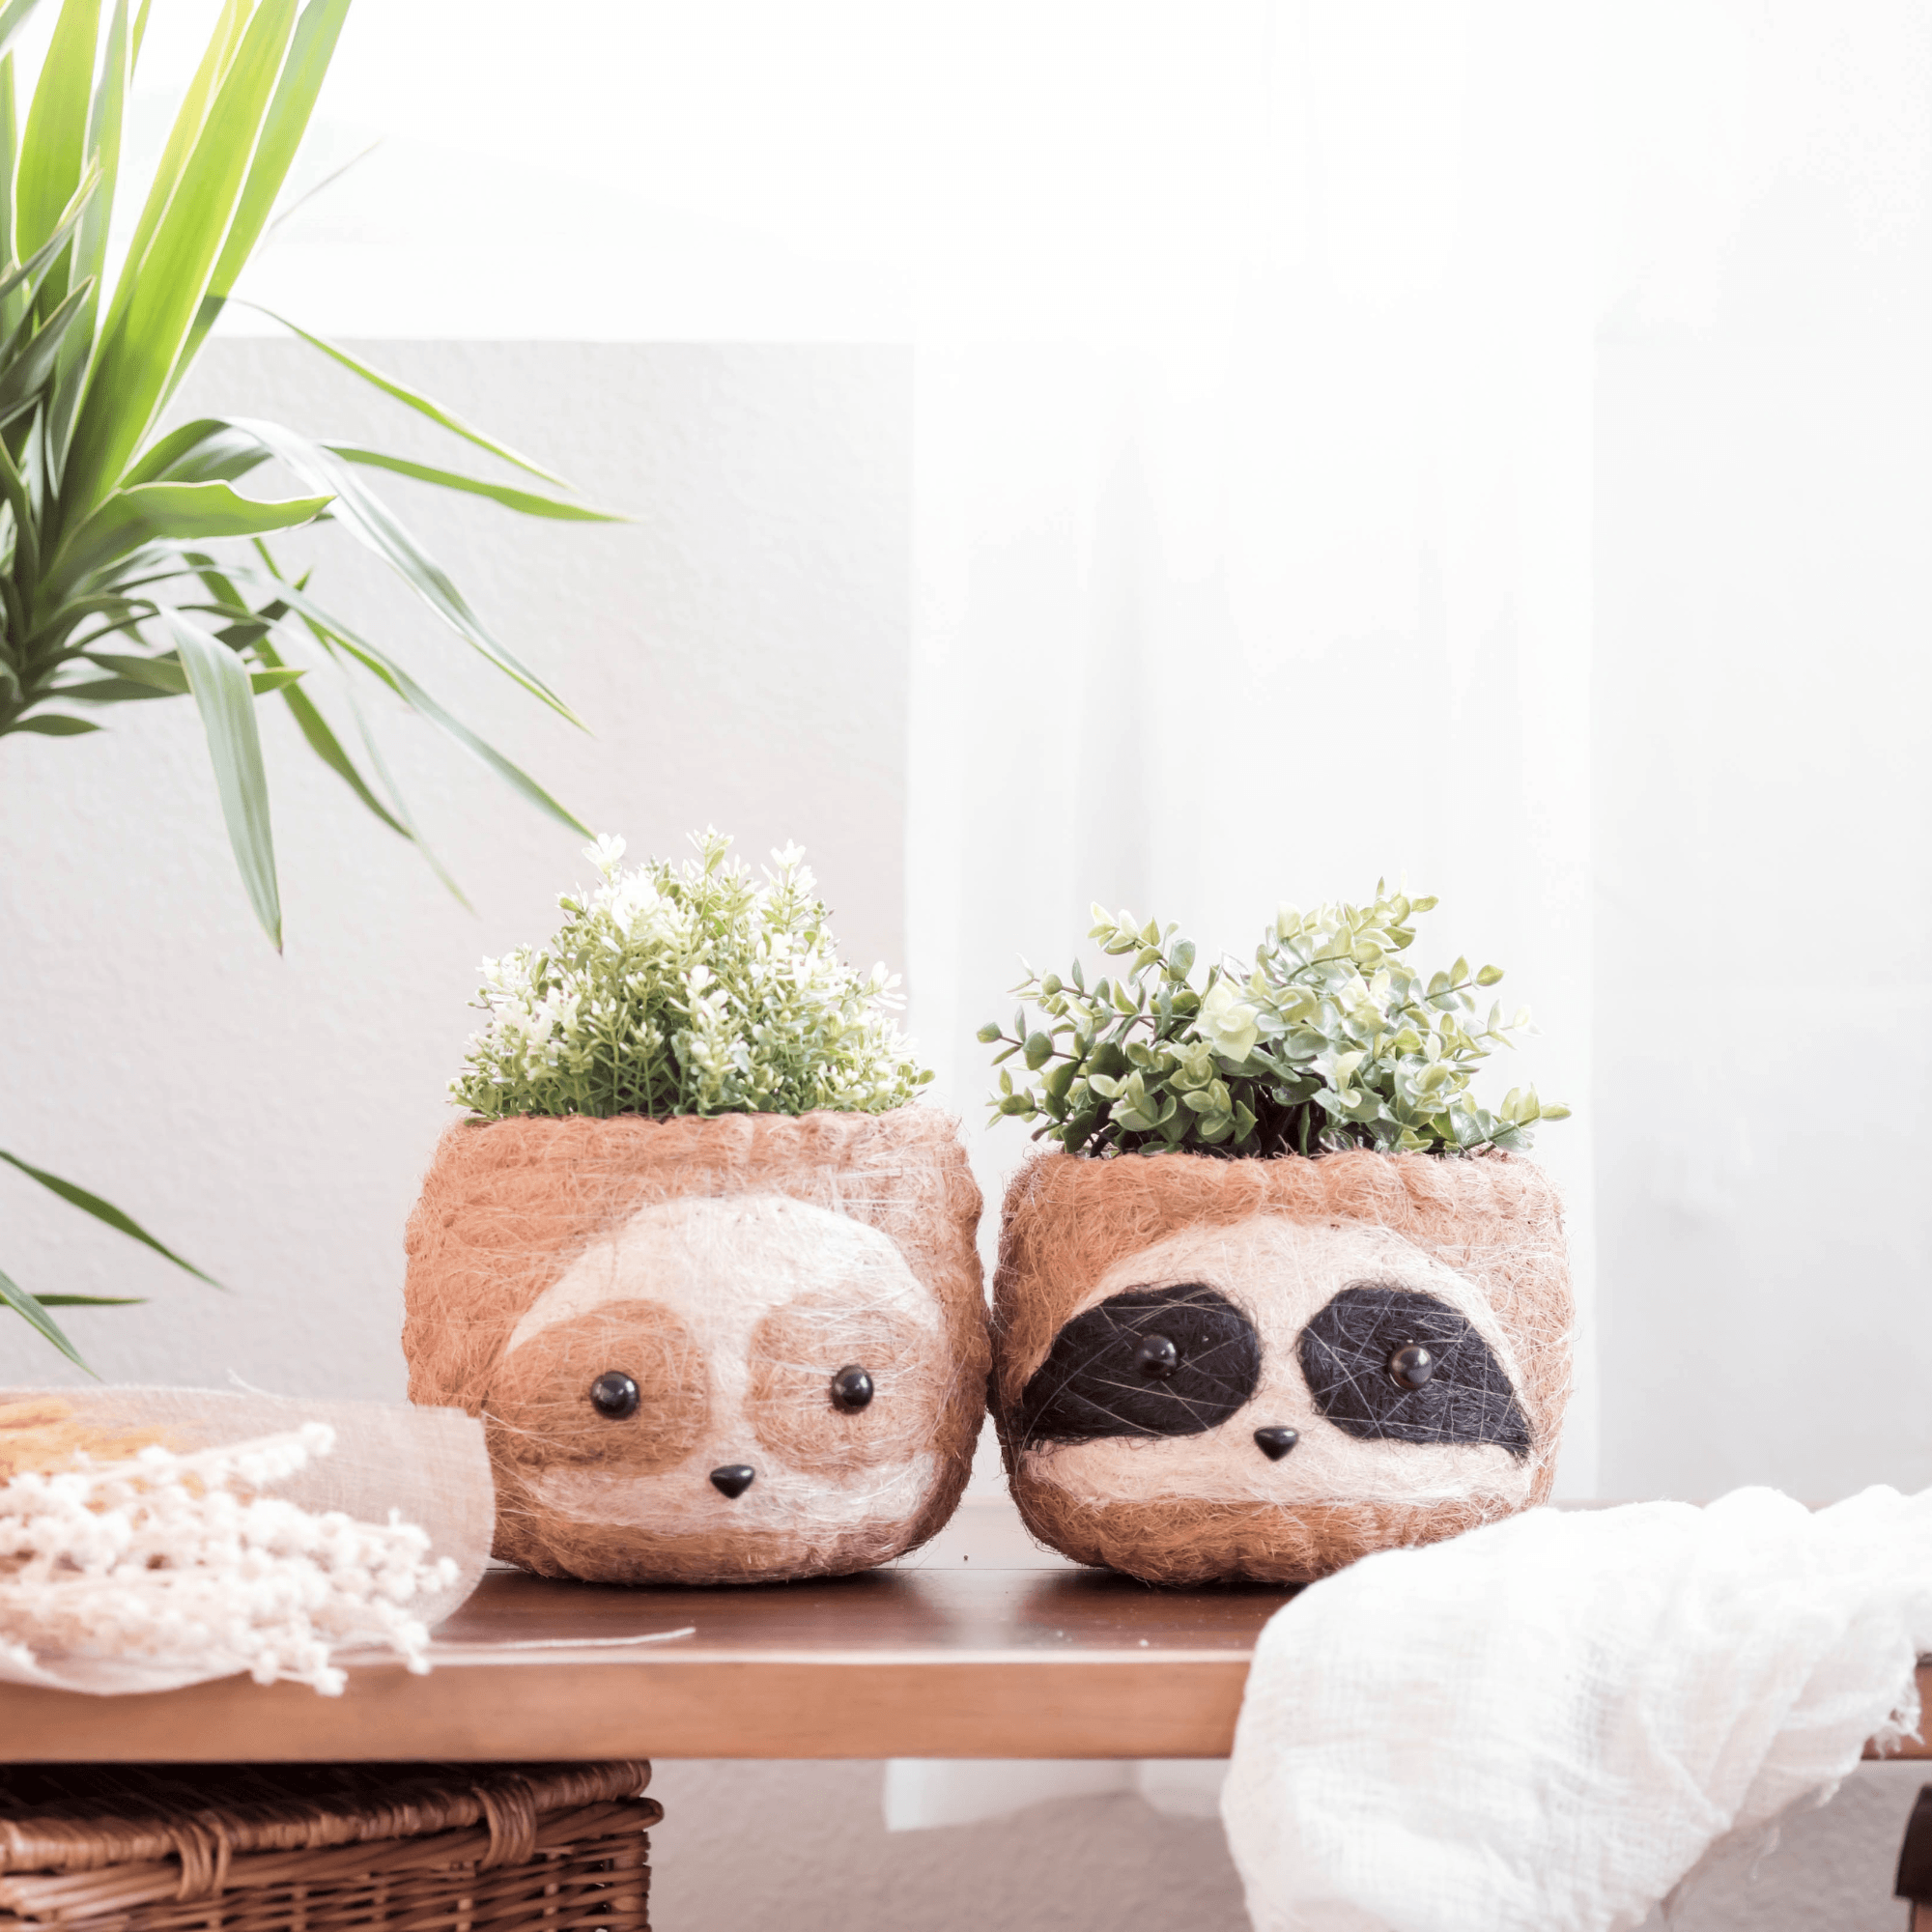 Decorating for Spring: How to Display House Plants - LIKHÂ